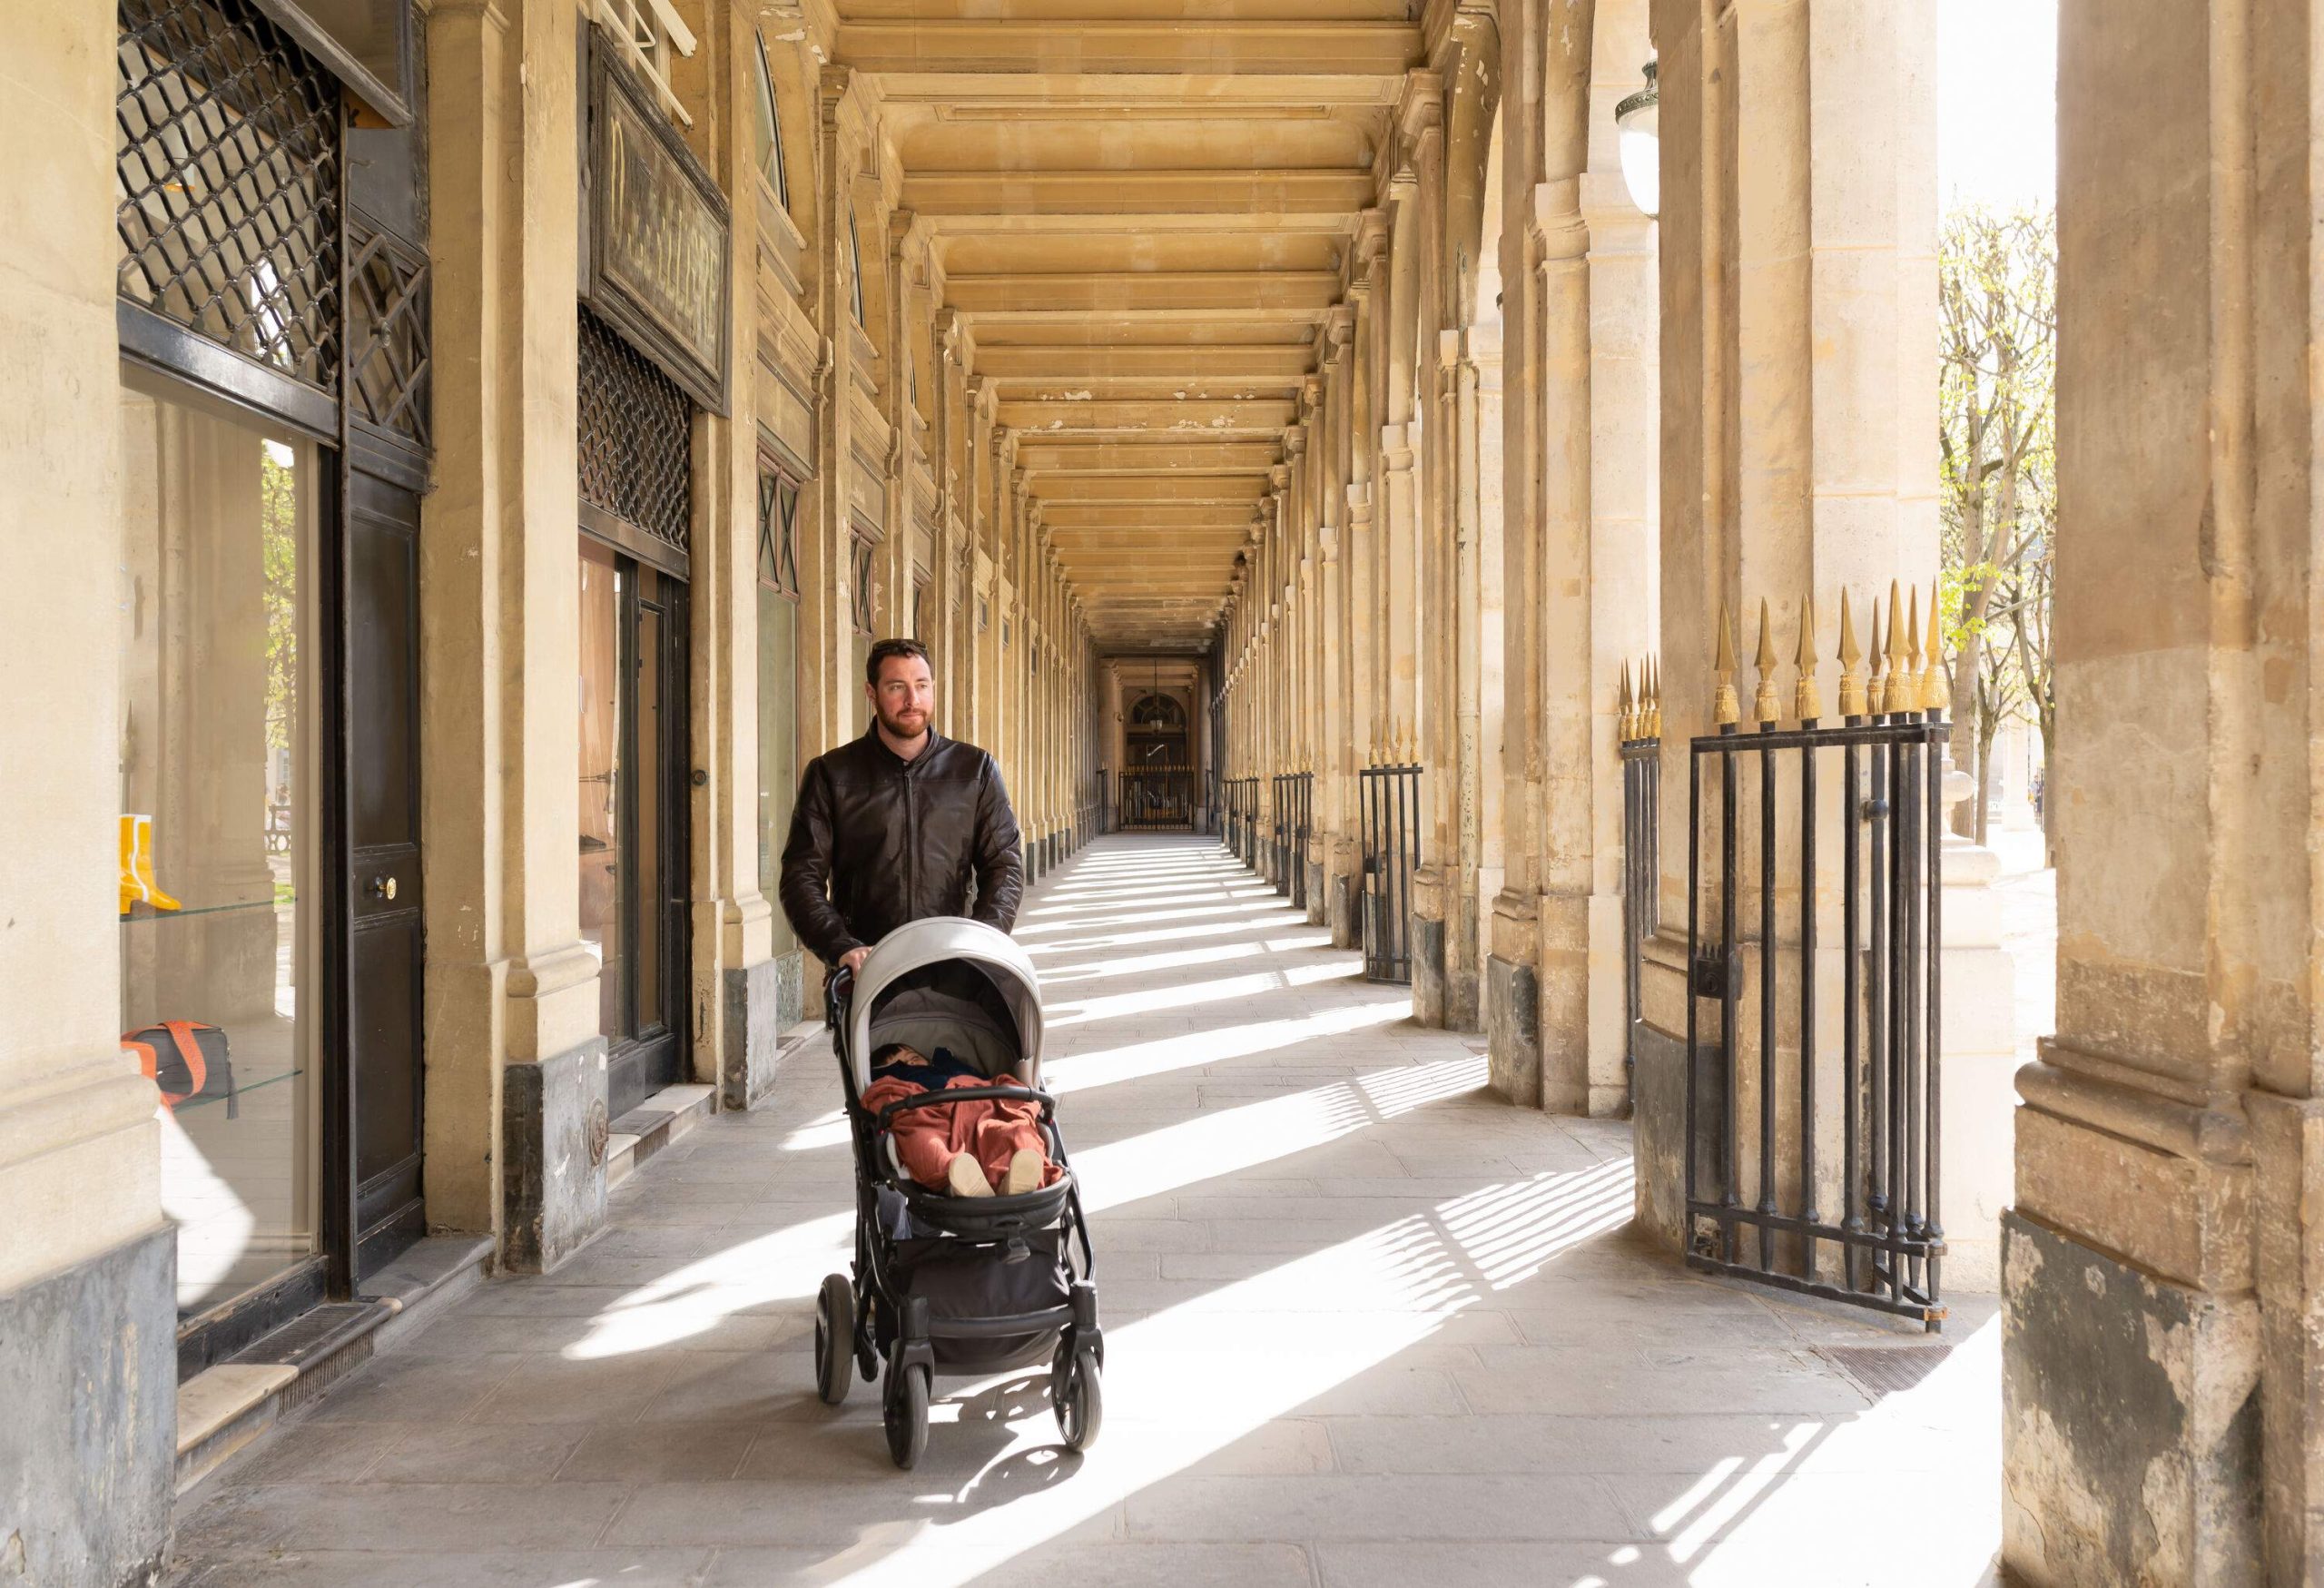 A man pushing a pram carrying a small child along the corridor of an old building.